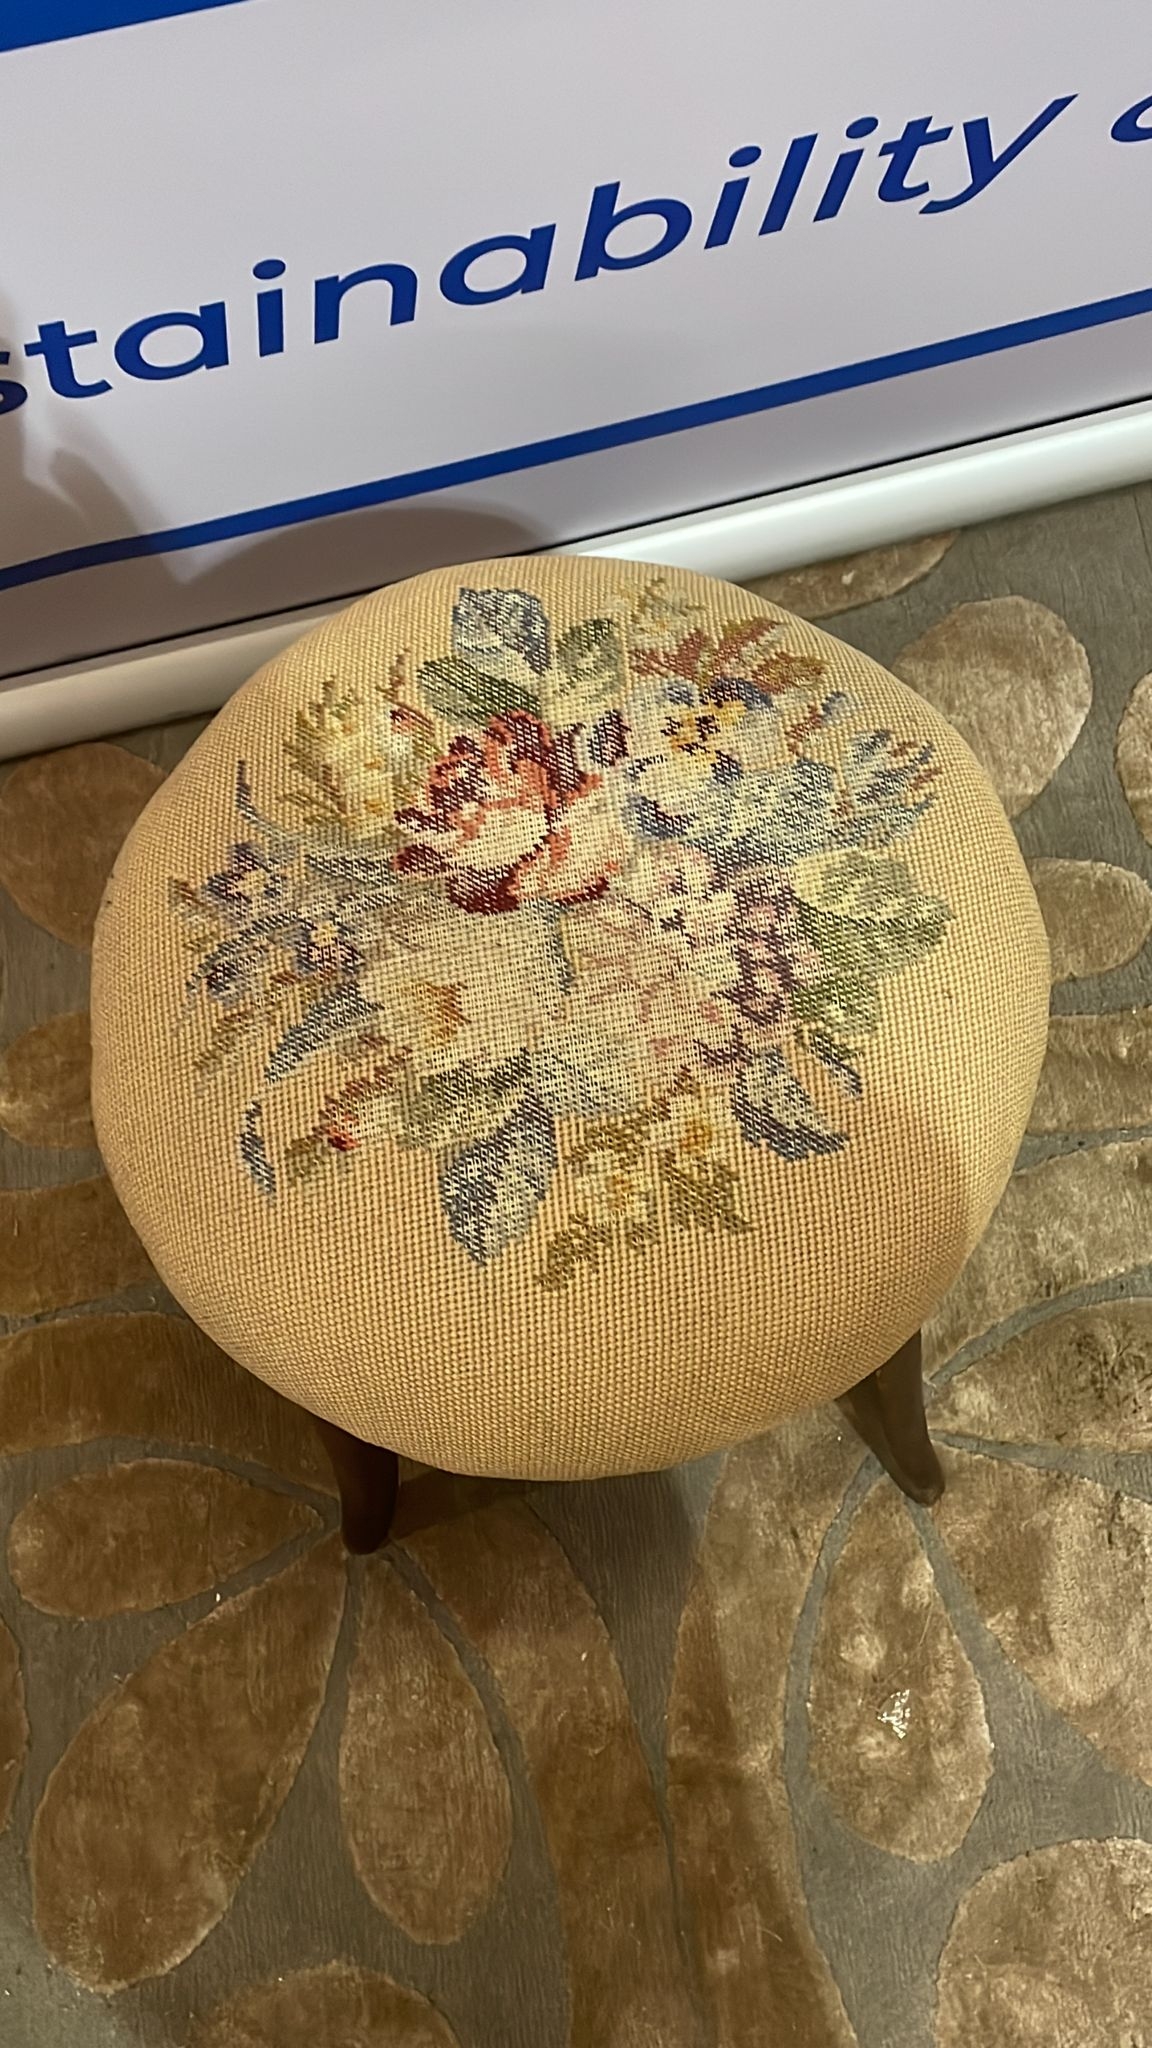 A Milk Maid Stool Finely Upholstered With A Floral Print Pad Seat 36 x 45cm - Image 2 of 2